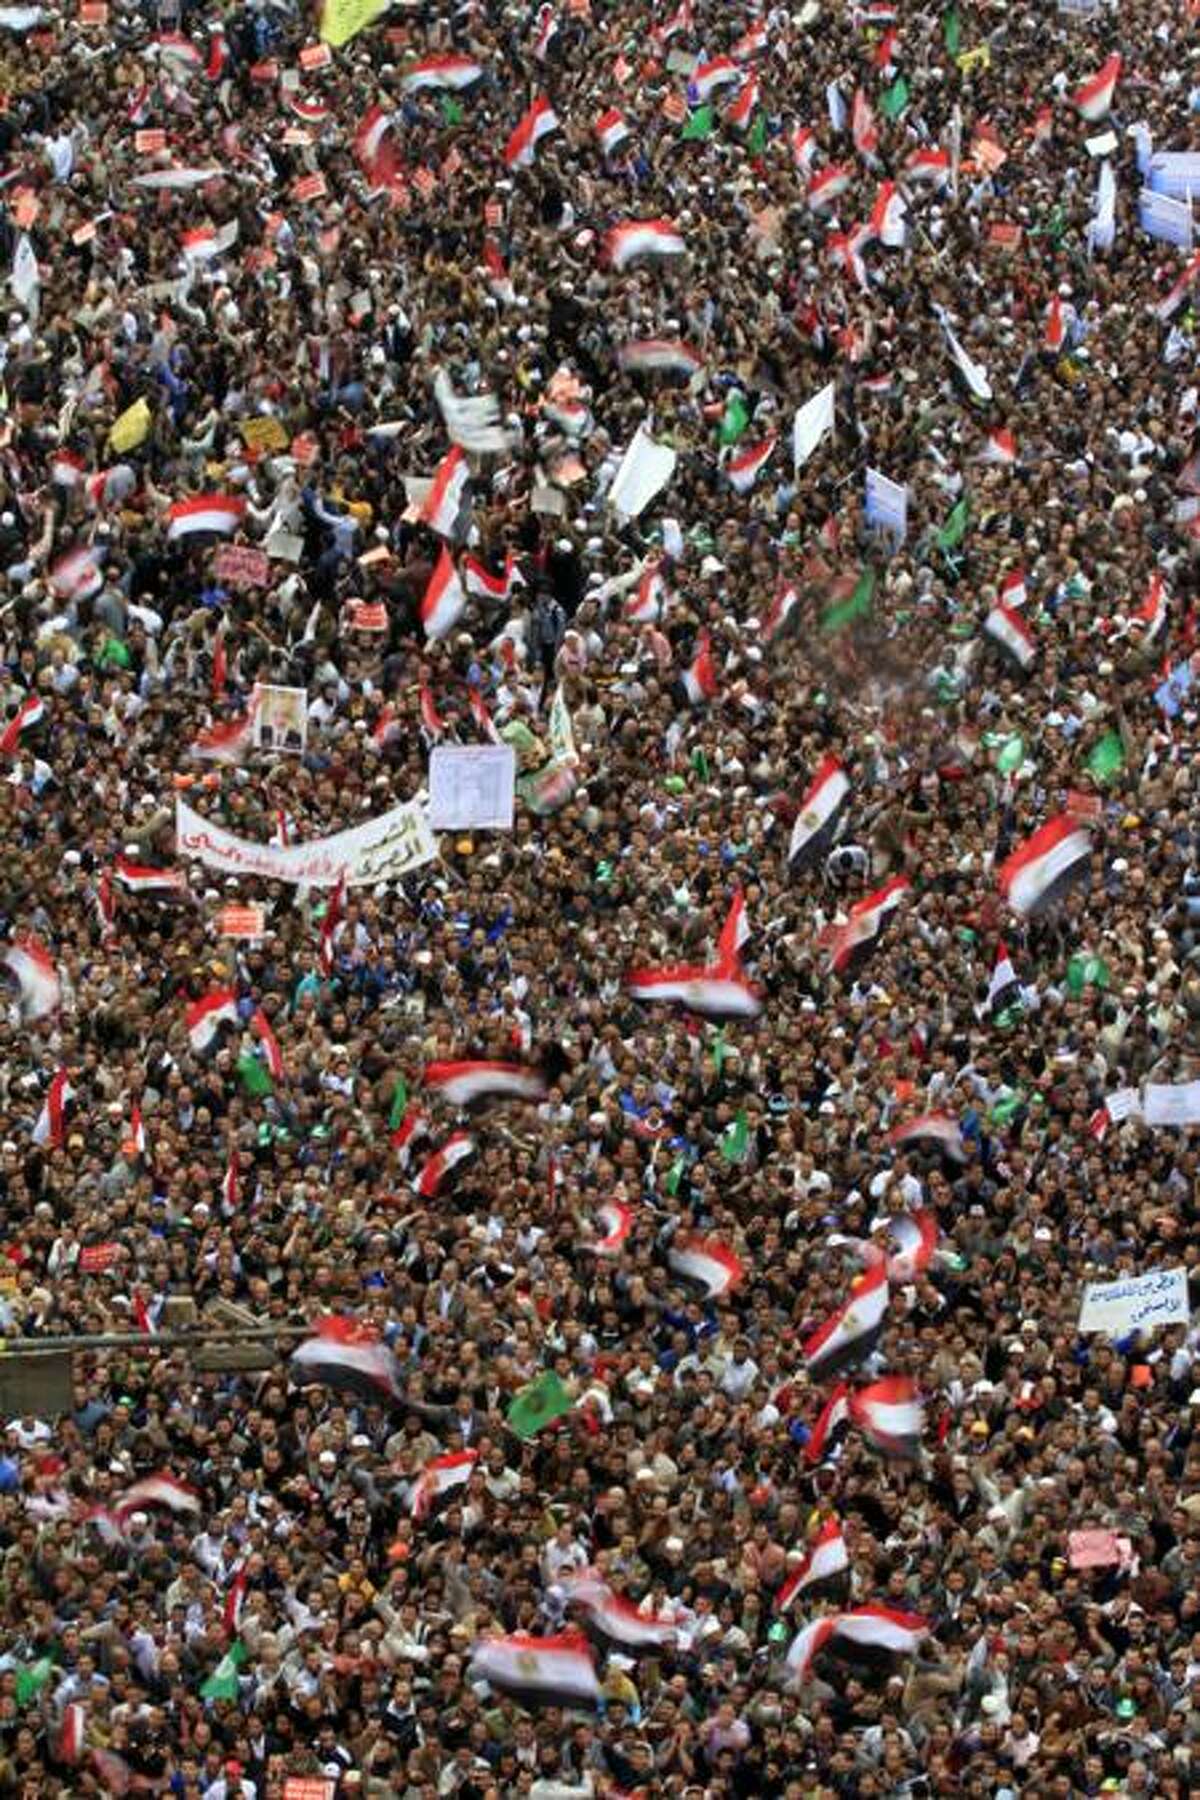 Protesters wave banners and Egyptian national flags in Tahrir Square, Cairo, Friday. Associated Press